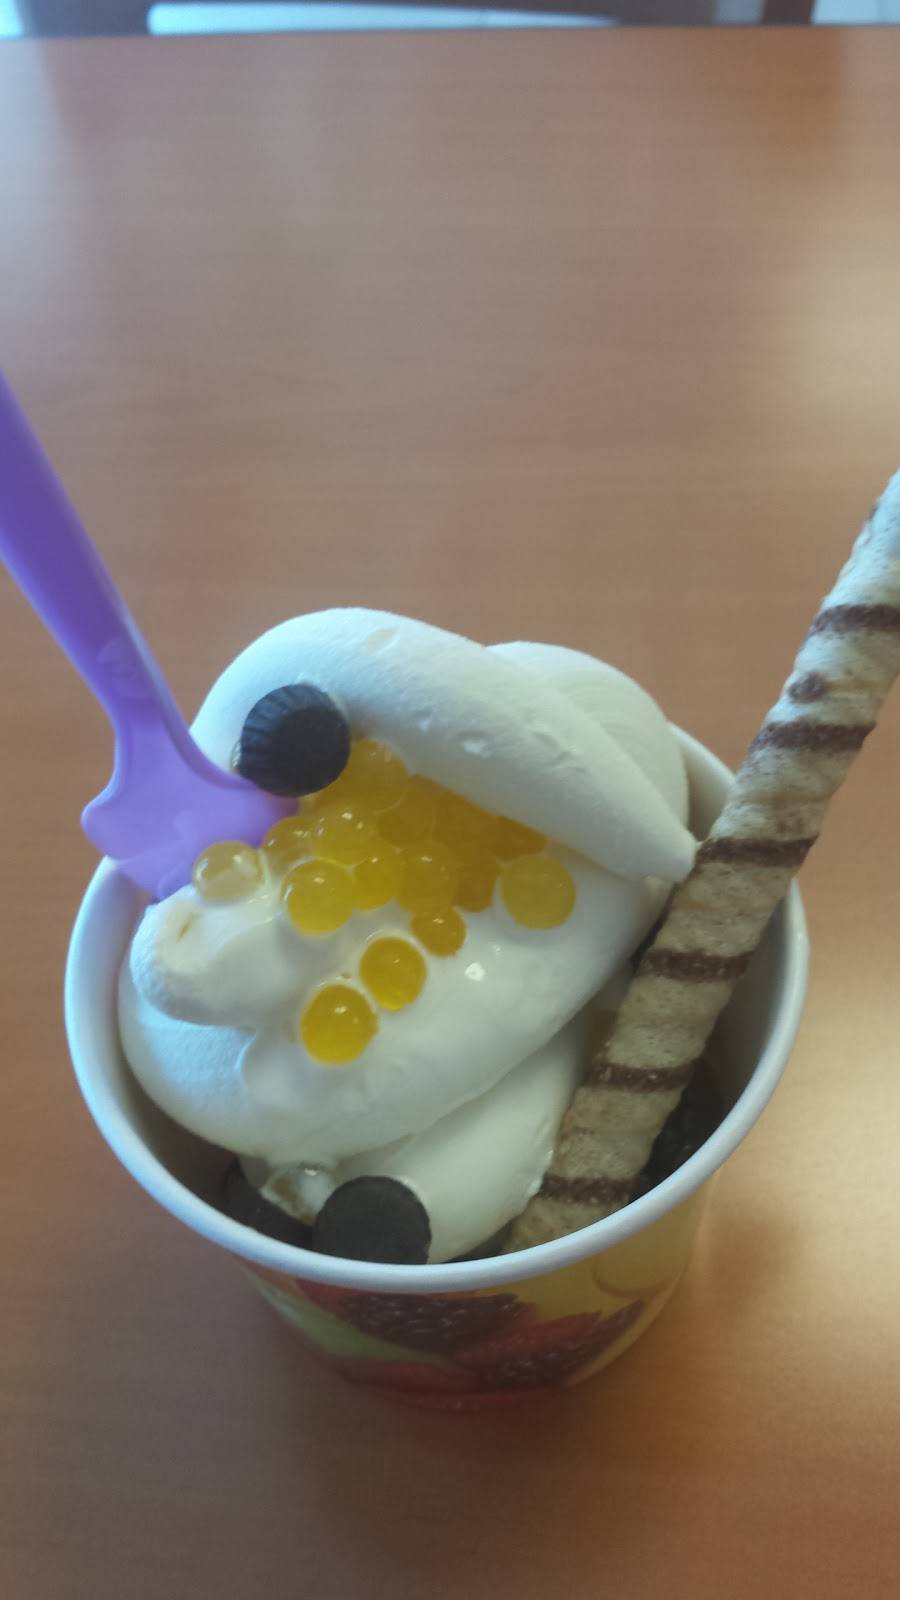 Scoops and Swirls | 5613 Calloway Dr #500, Bakersfield, CA 93312 | Phone: (661) 679-4956